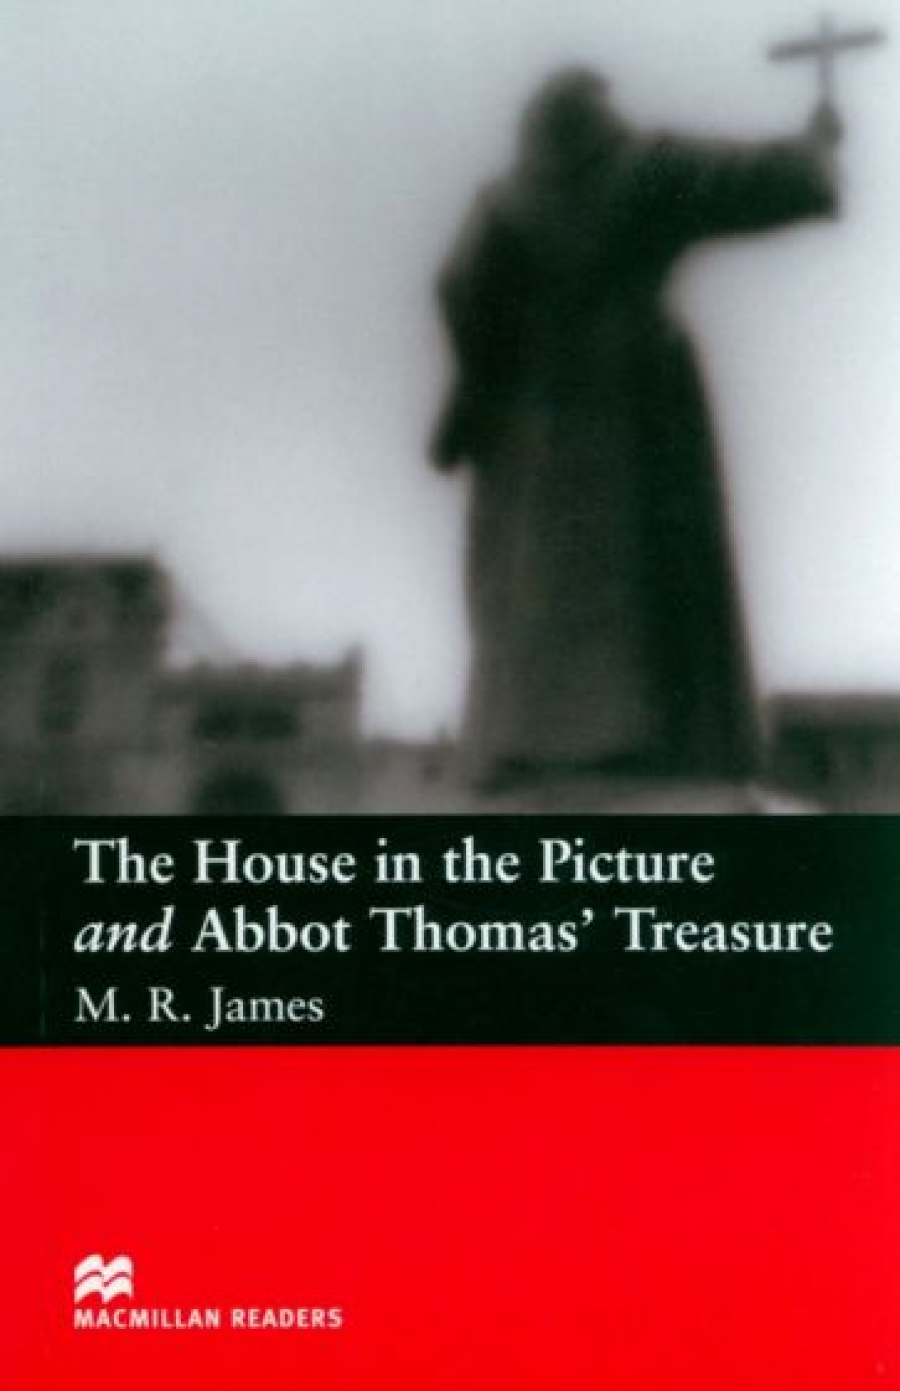 M. R. James, retold by F. H. Cornish The House in the Picture and Abbott Thomas' Treasure 